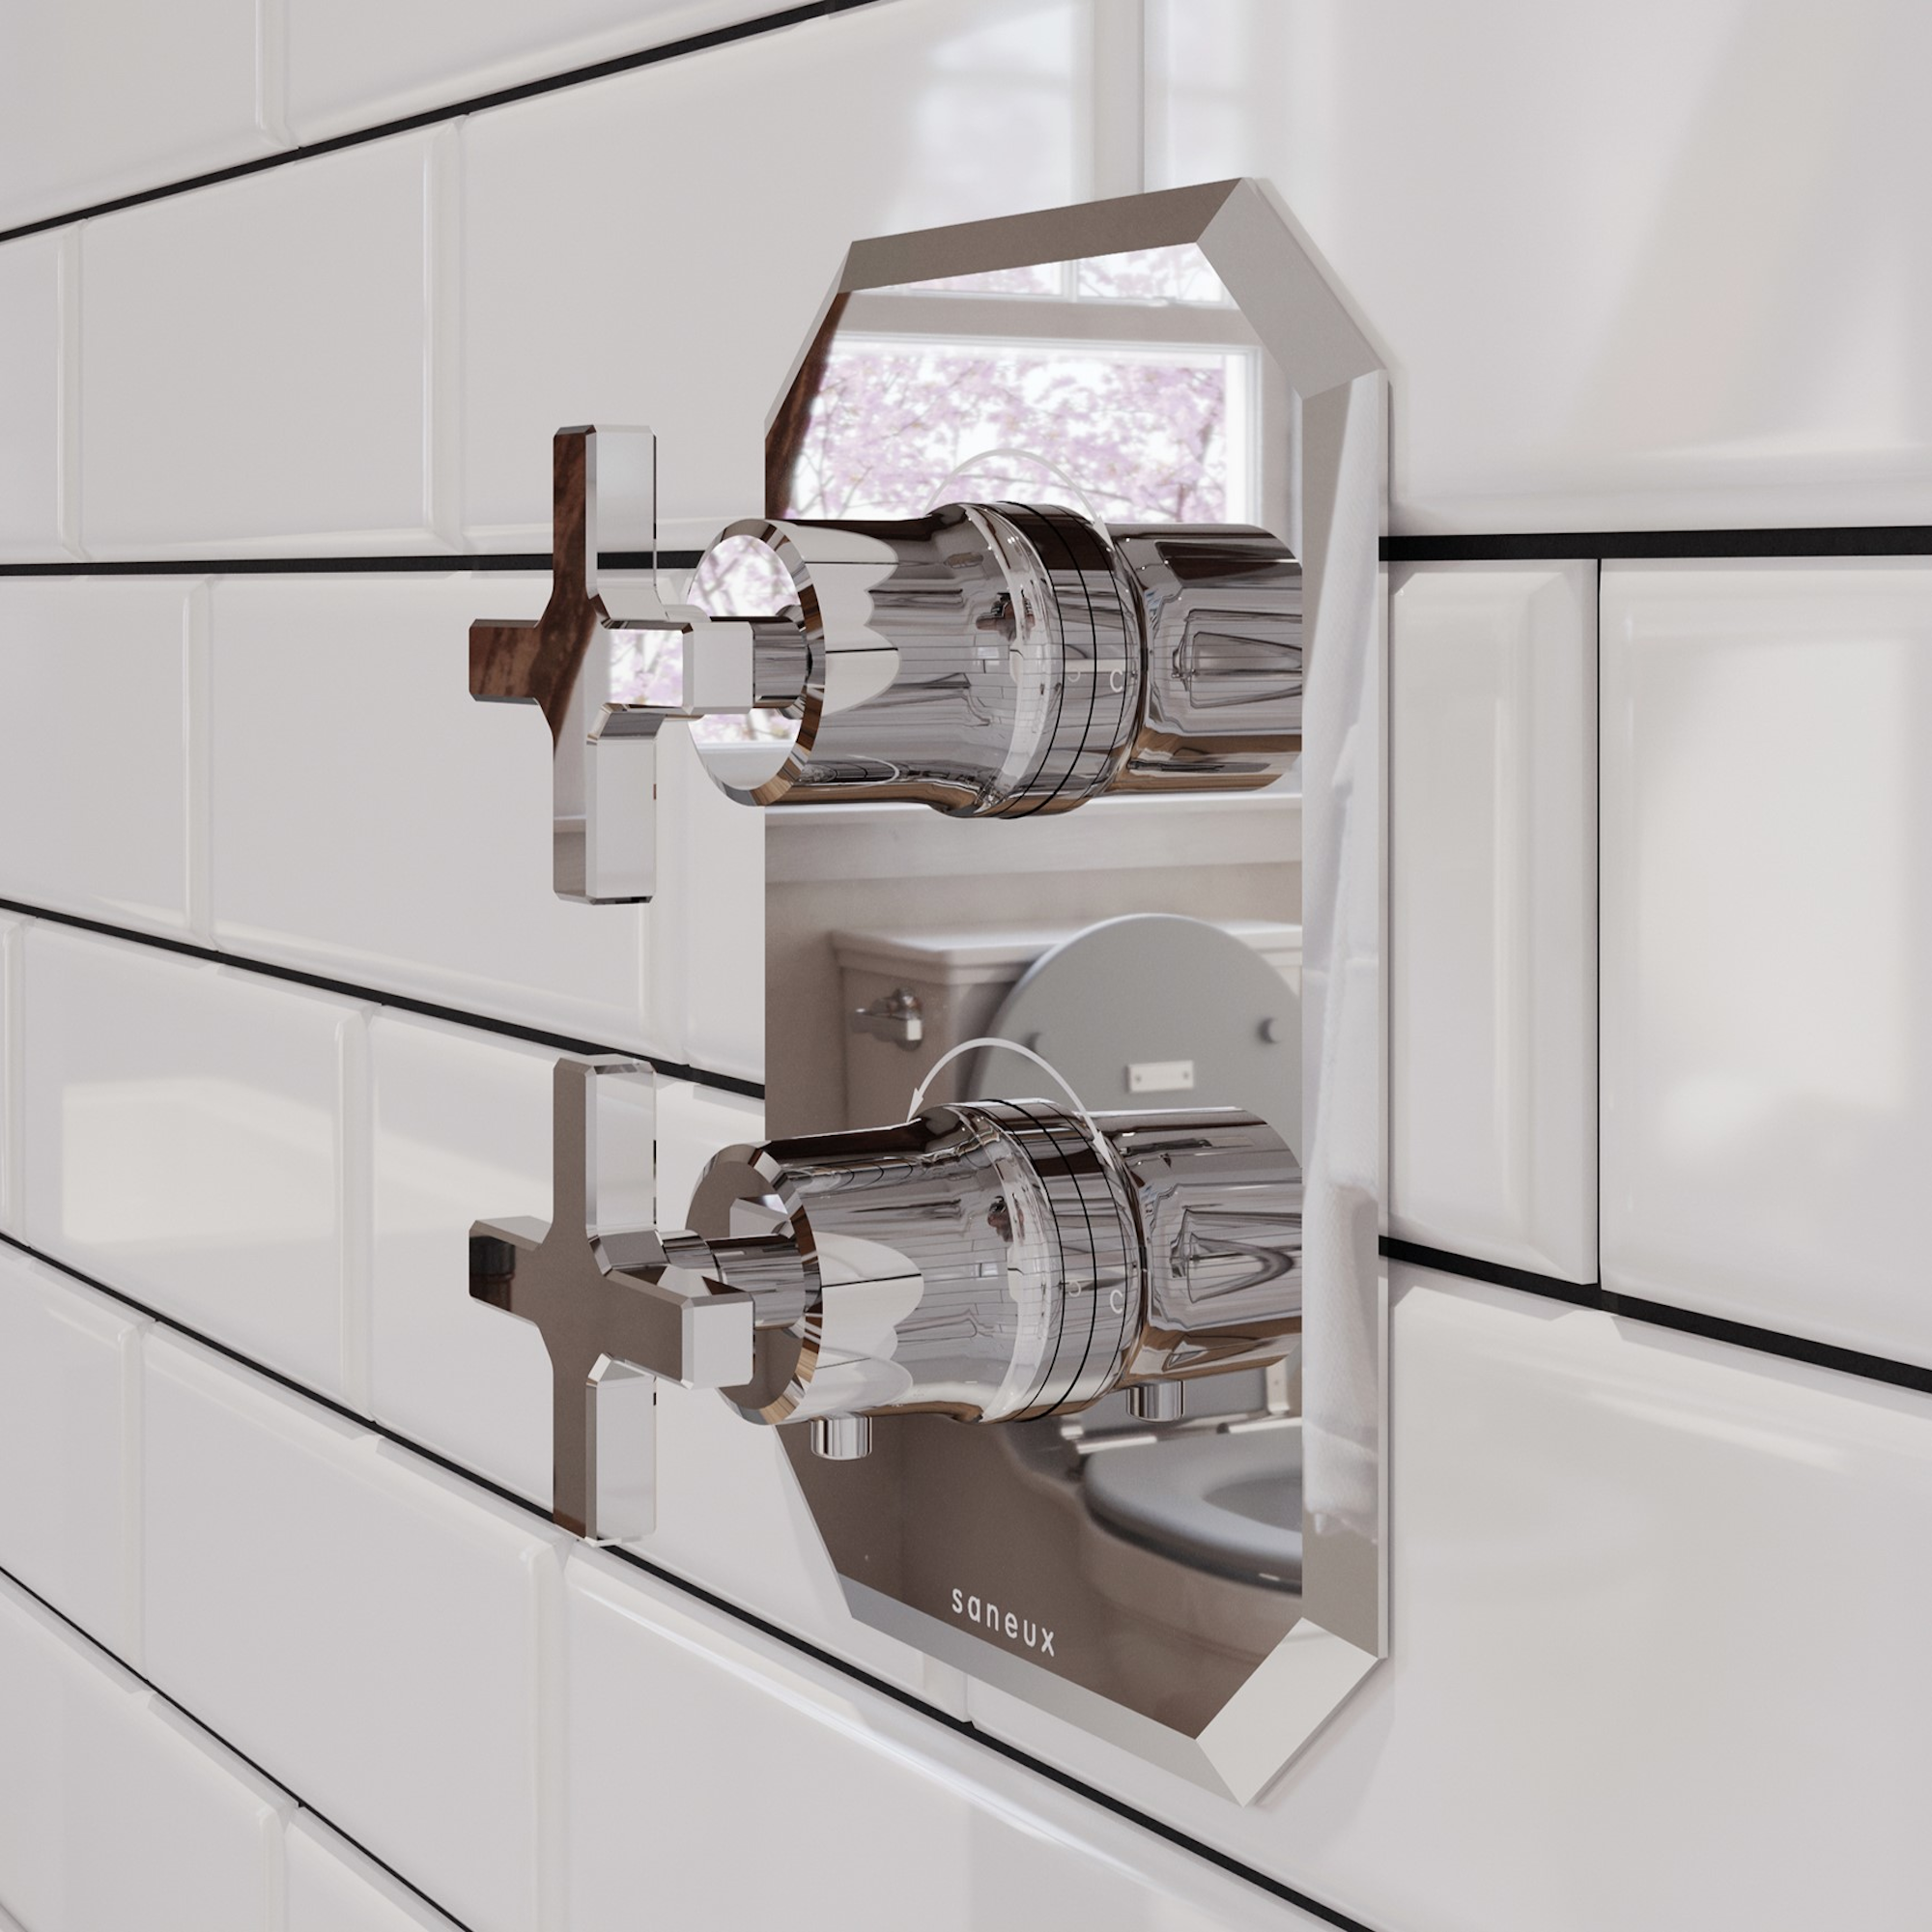 Saneux Cromwell Concealed Shower Valve Cross Handles